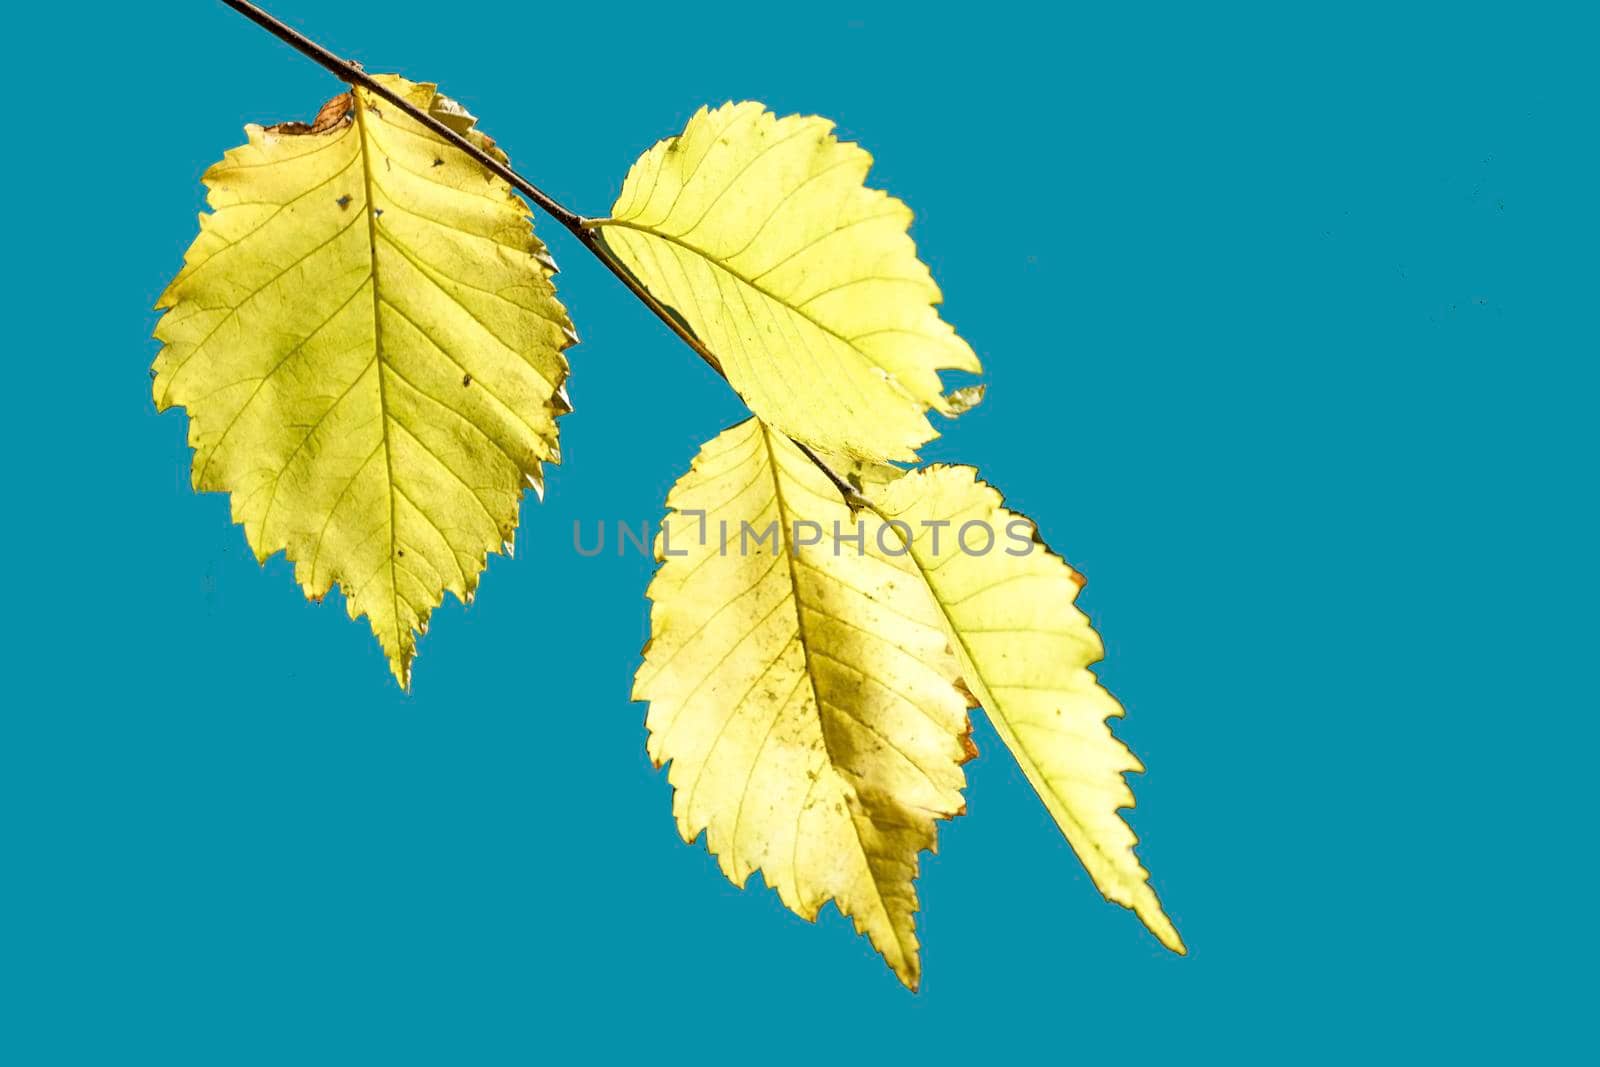 Natural background with yellow leaves on a blue sky.